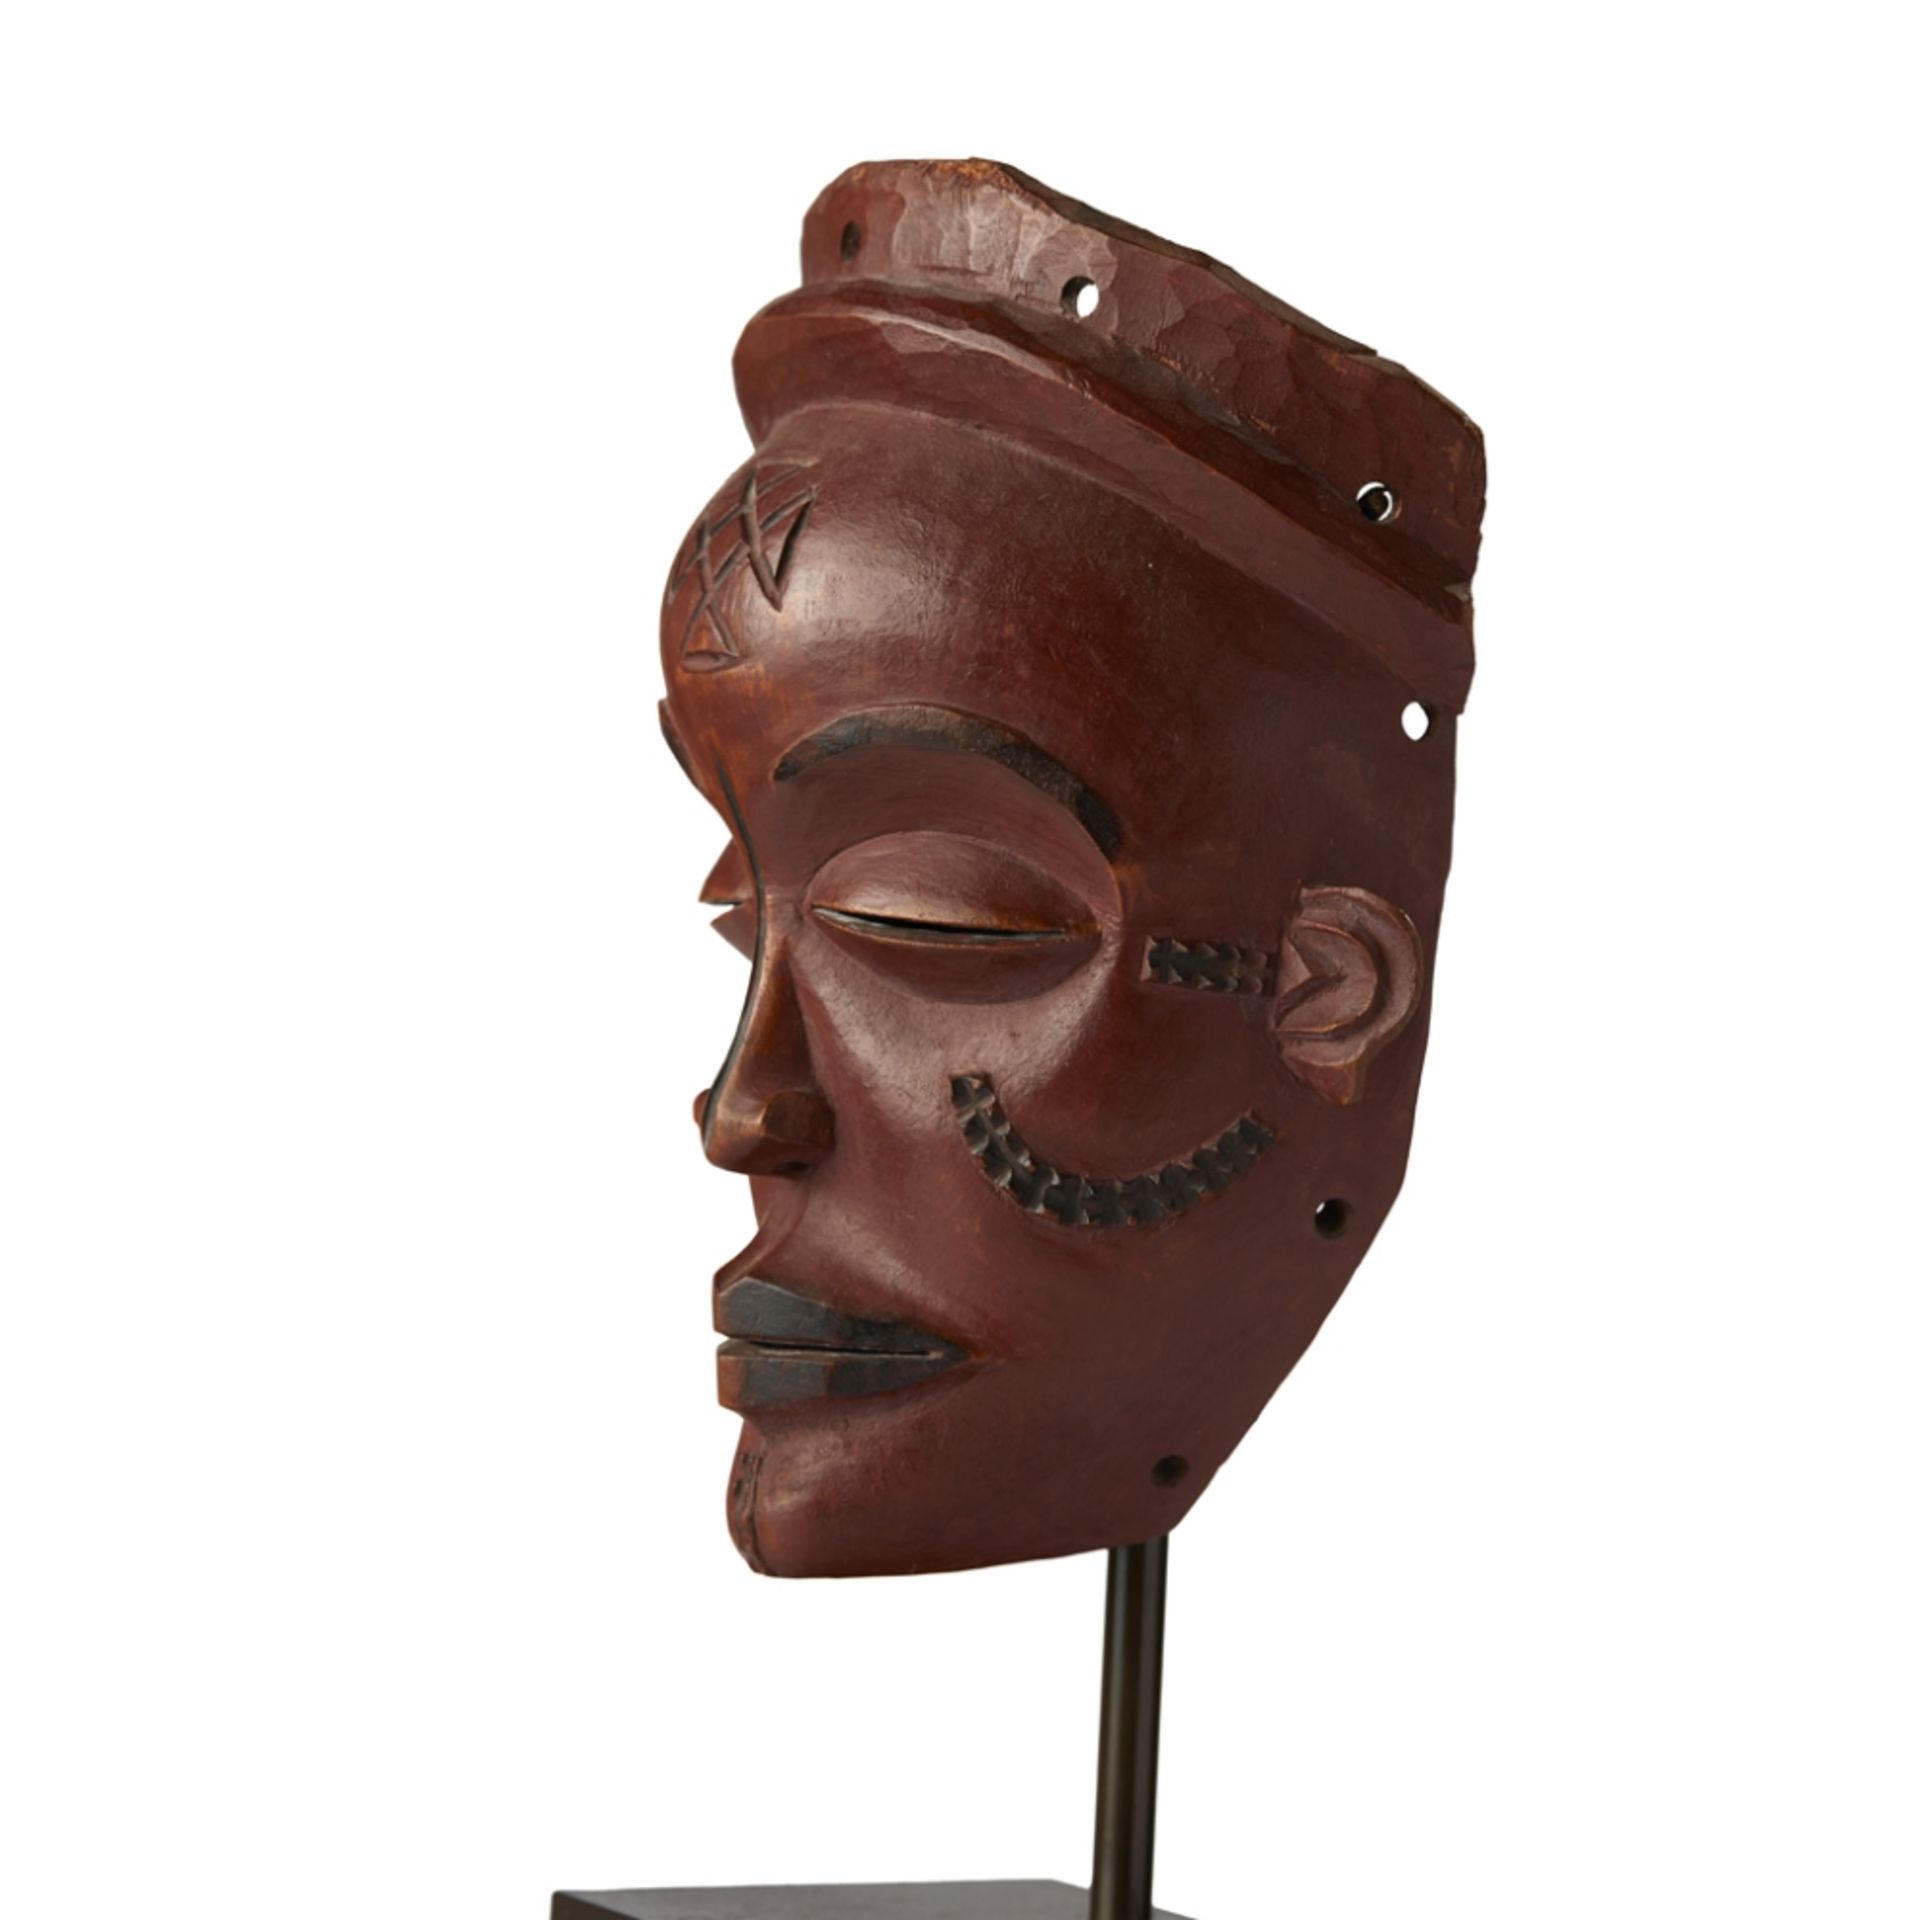 CHOKWE MASK, PWOANGOLA carved wood, the softly curving chin below fractionally parted lips, a medial - Image 4 of 6